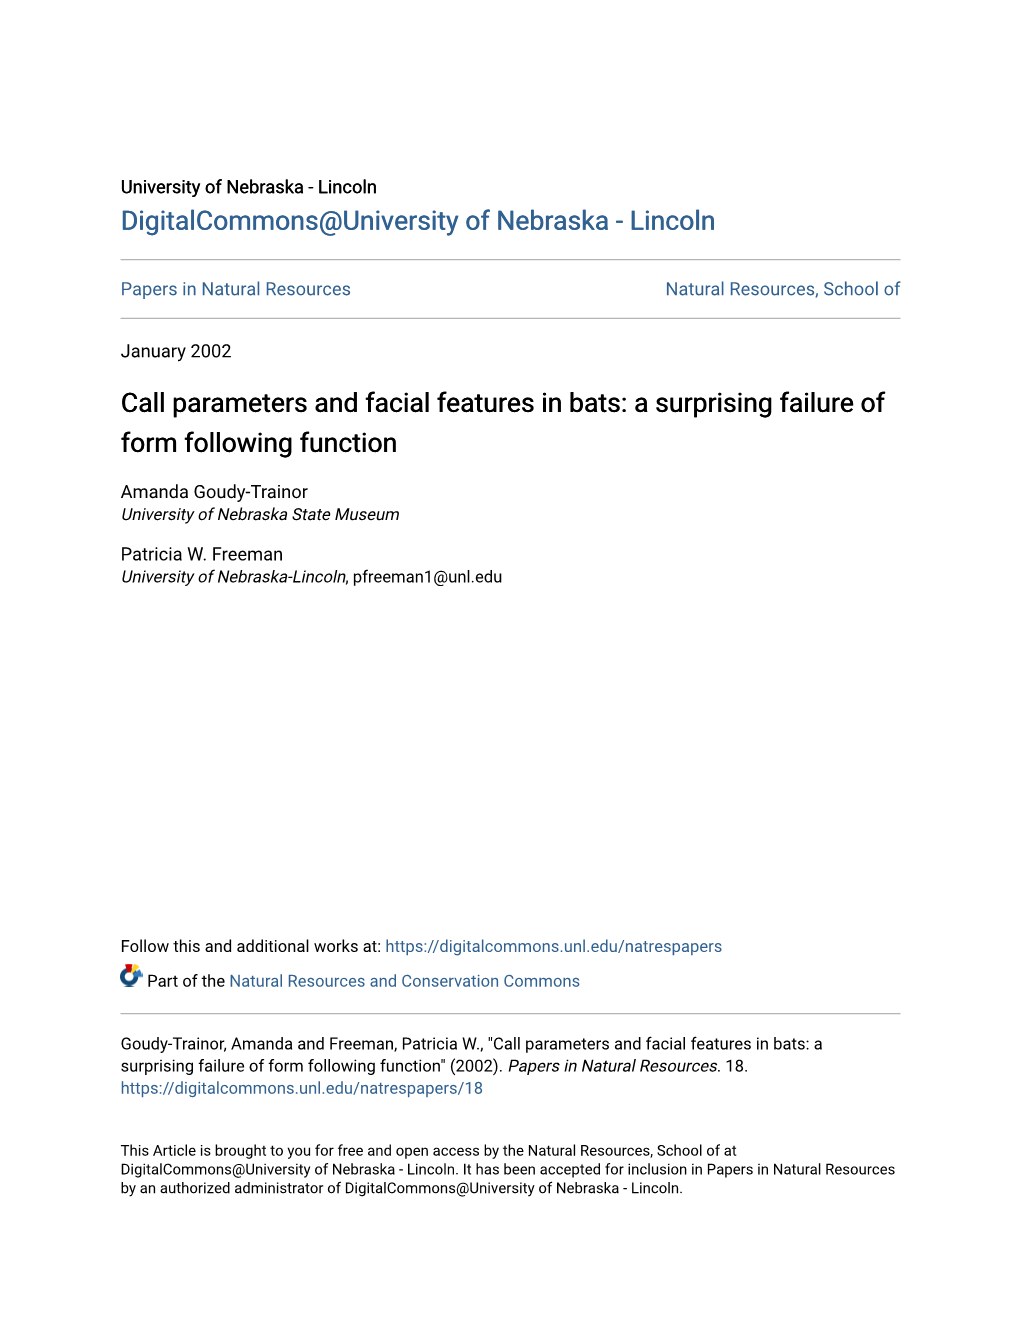 Call Parameters and Facial Features in Bats: a Surprising Failure of Form Following Function